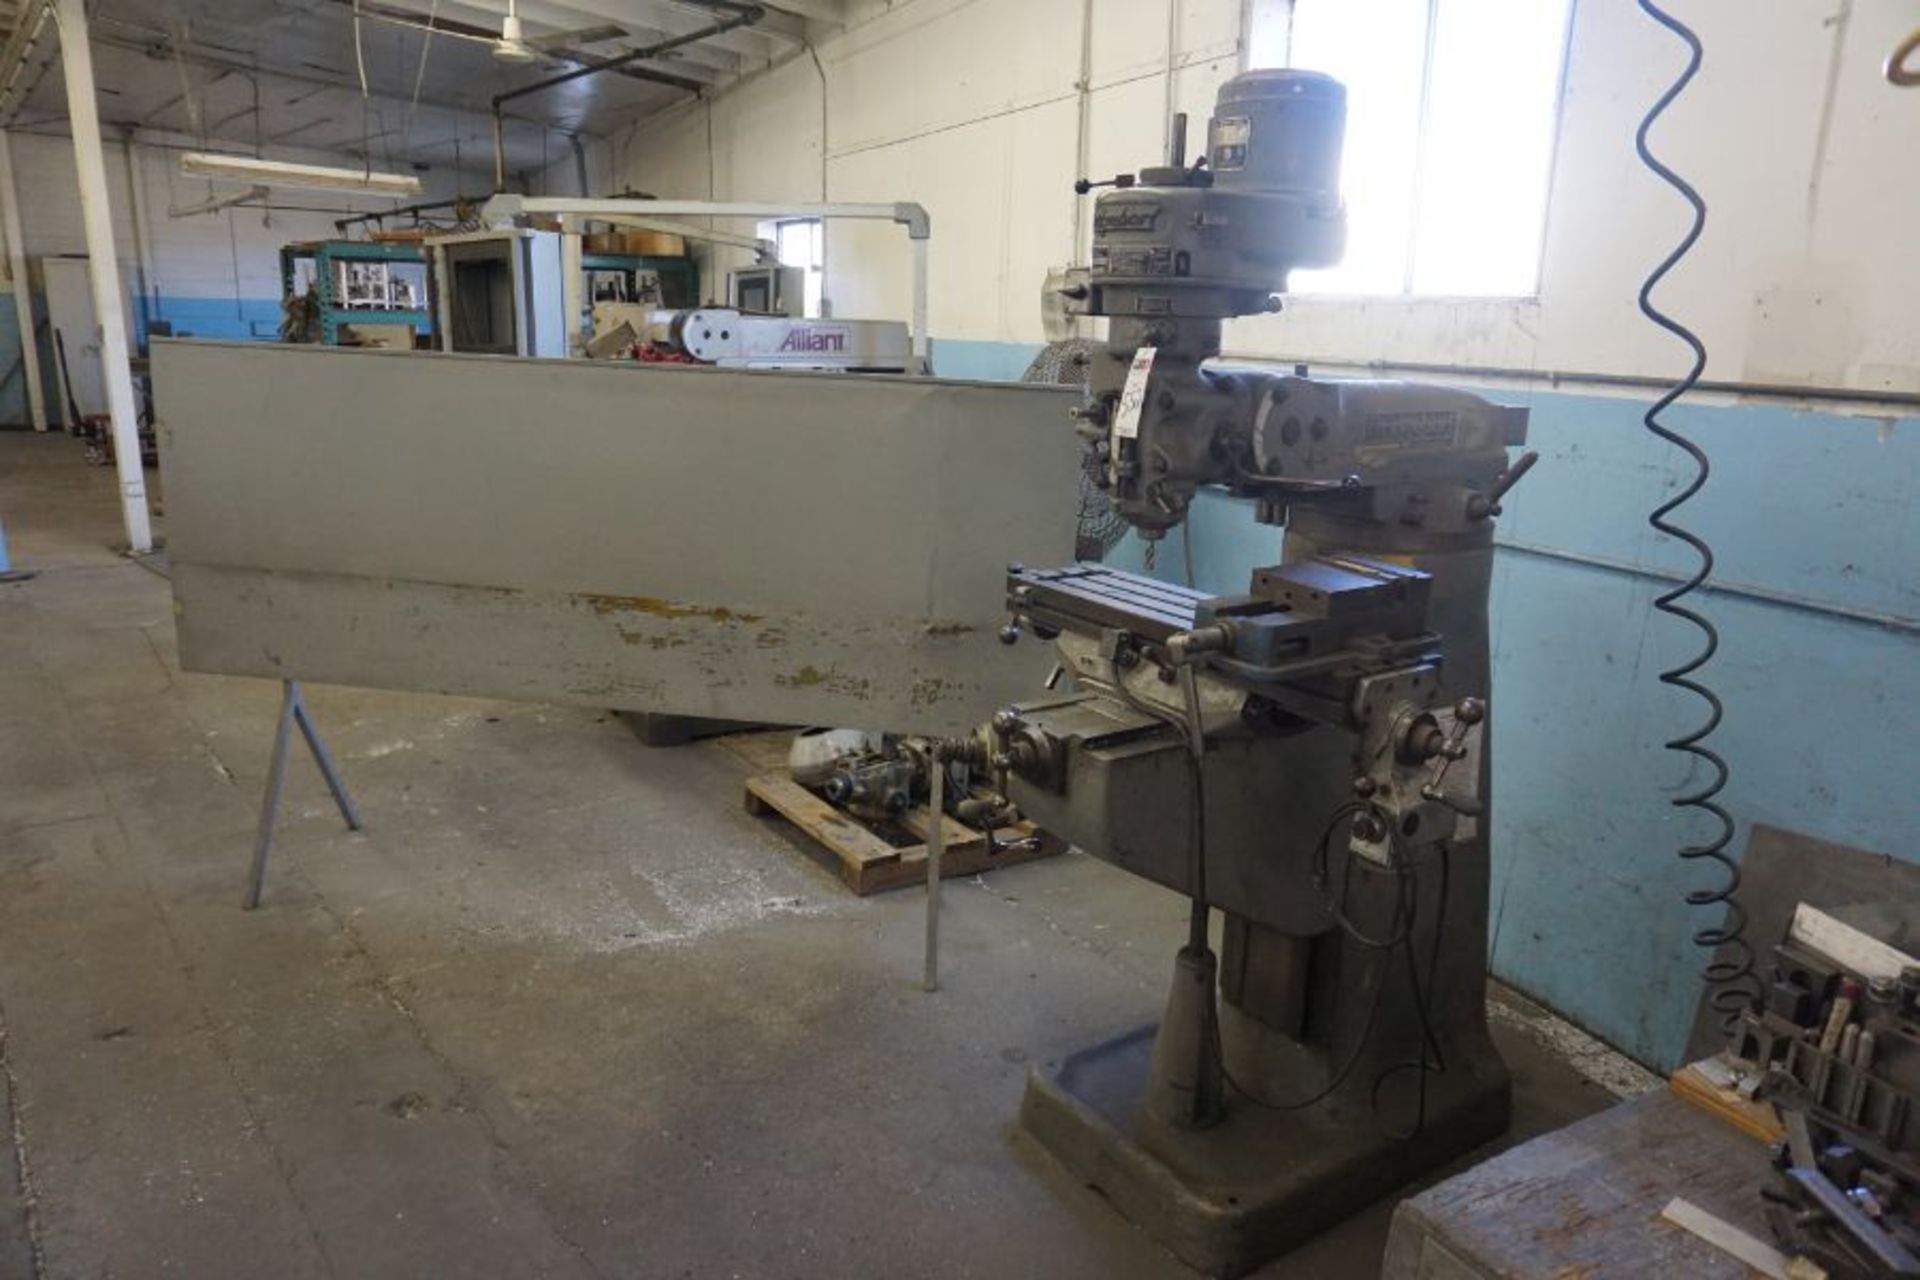 Bridgeport J Head Mill, 9" x 32" Table, s/n 87576 *Auctioned from Edgerton, KS* - Image 3 of 4